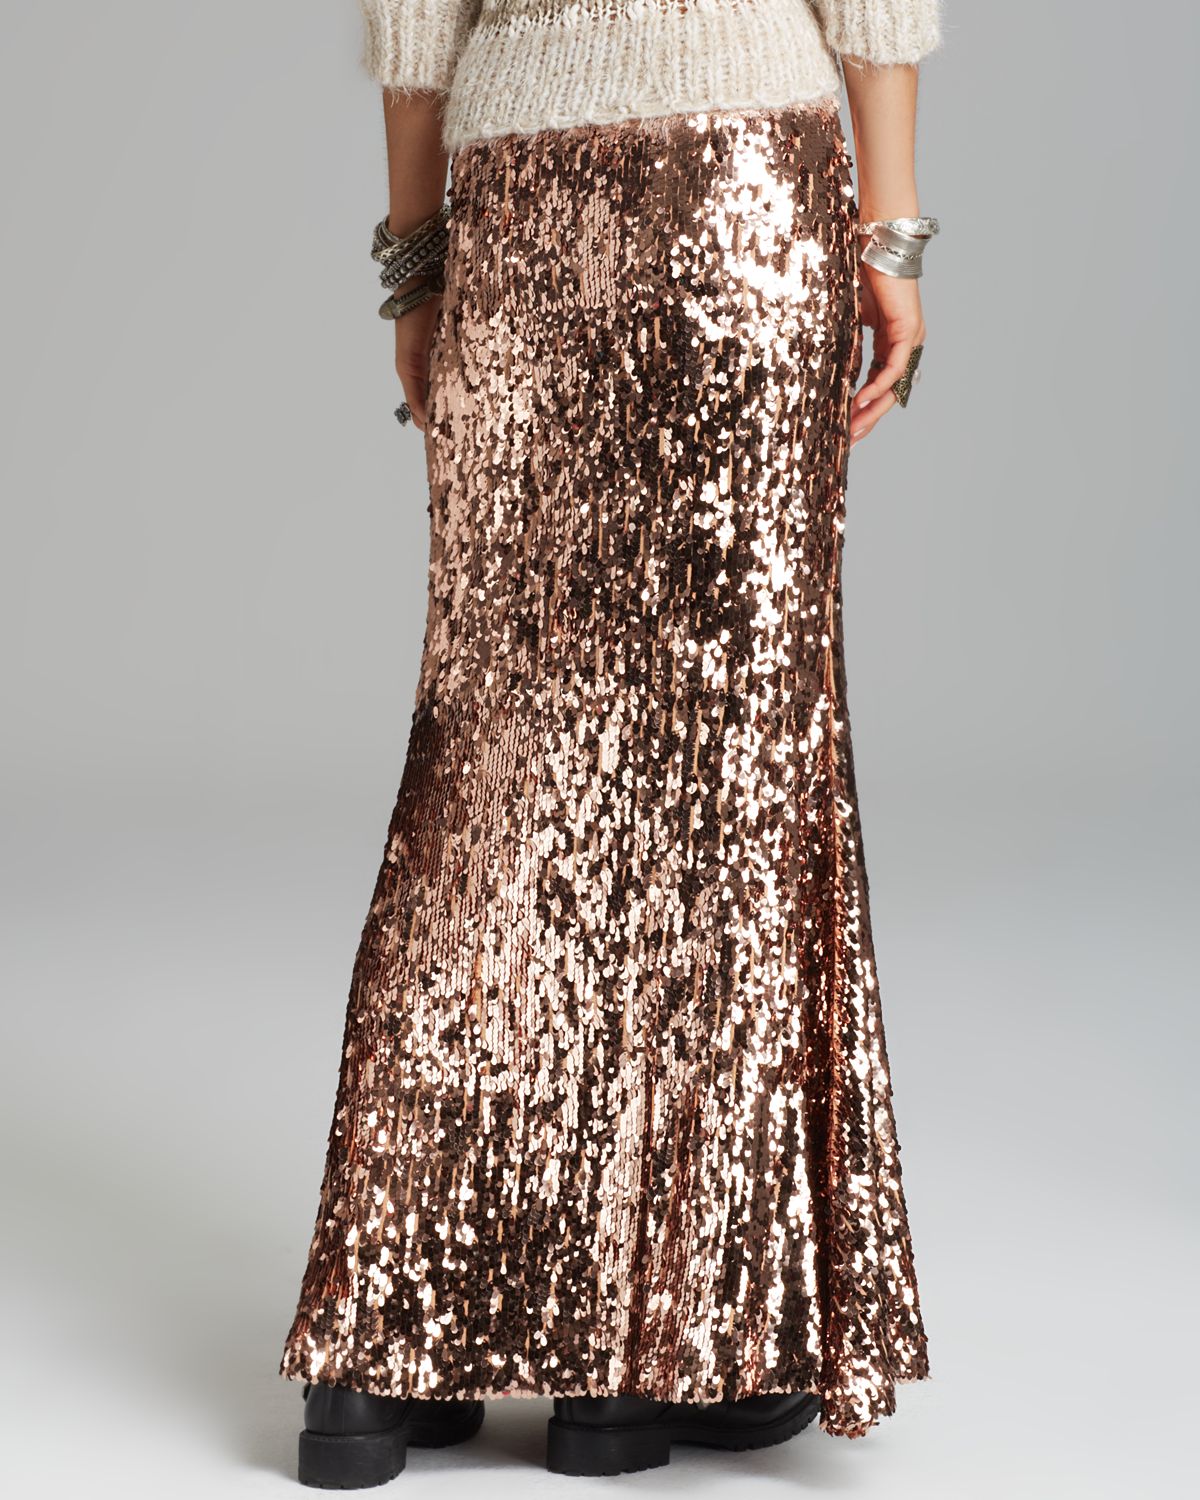 Lyst - Free People Maxi Skirt - Sequins For Miles in Metallic